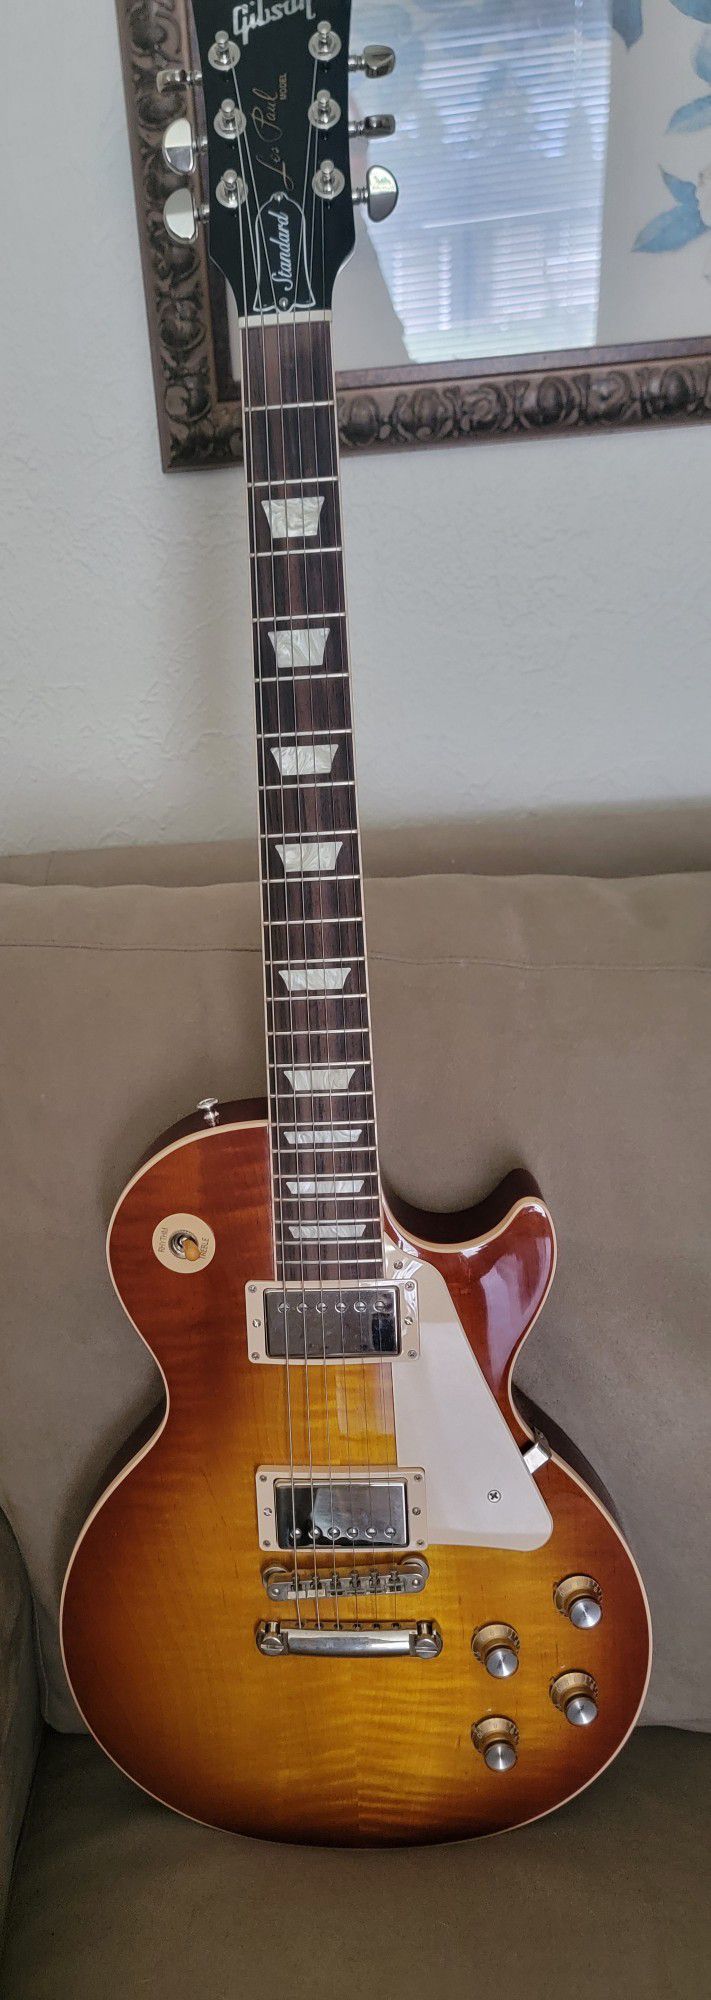 ULTIMATE FATHER'S DAY GIFT.  2019 Gibson Les Paul Guitar 